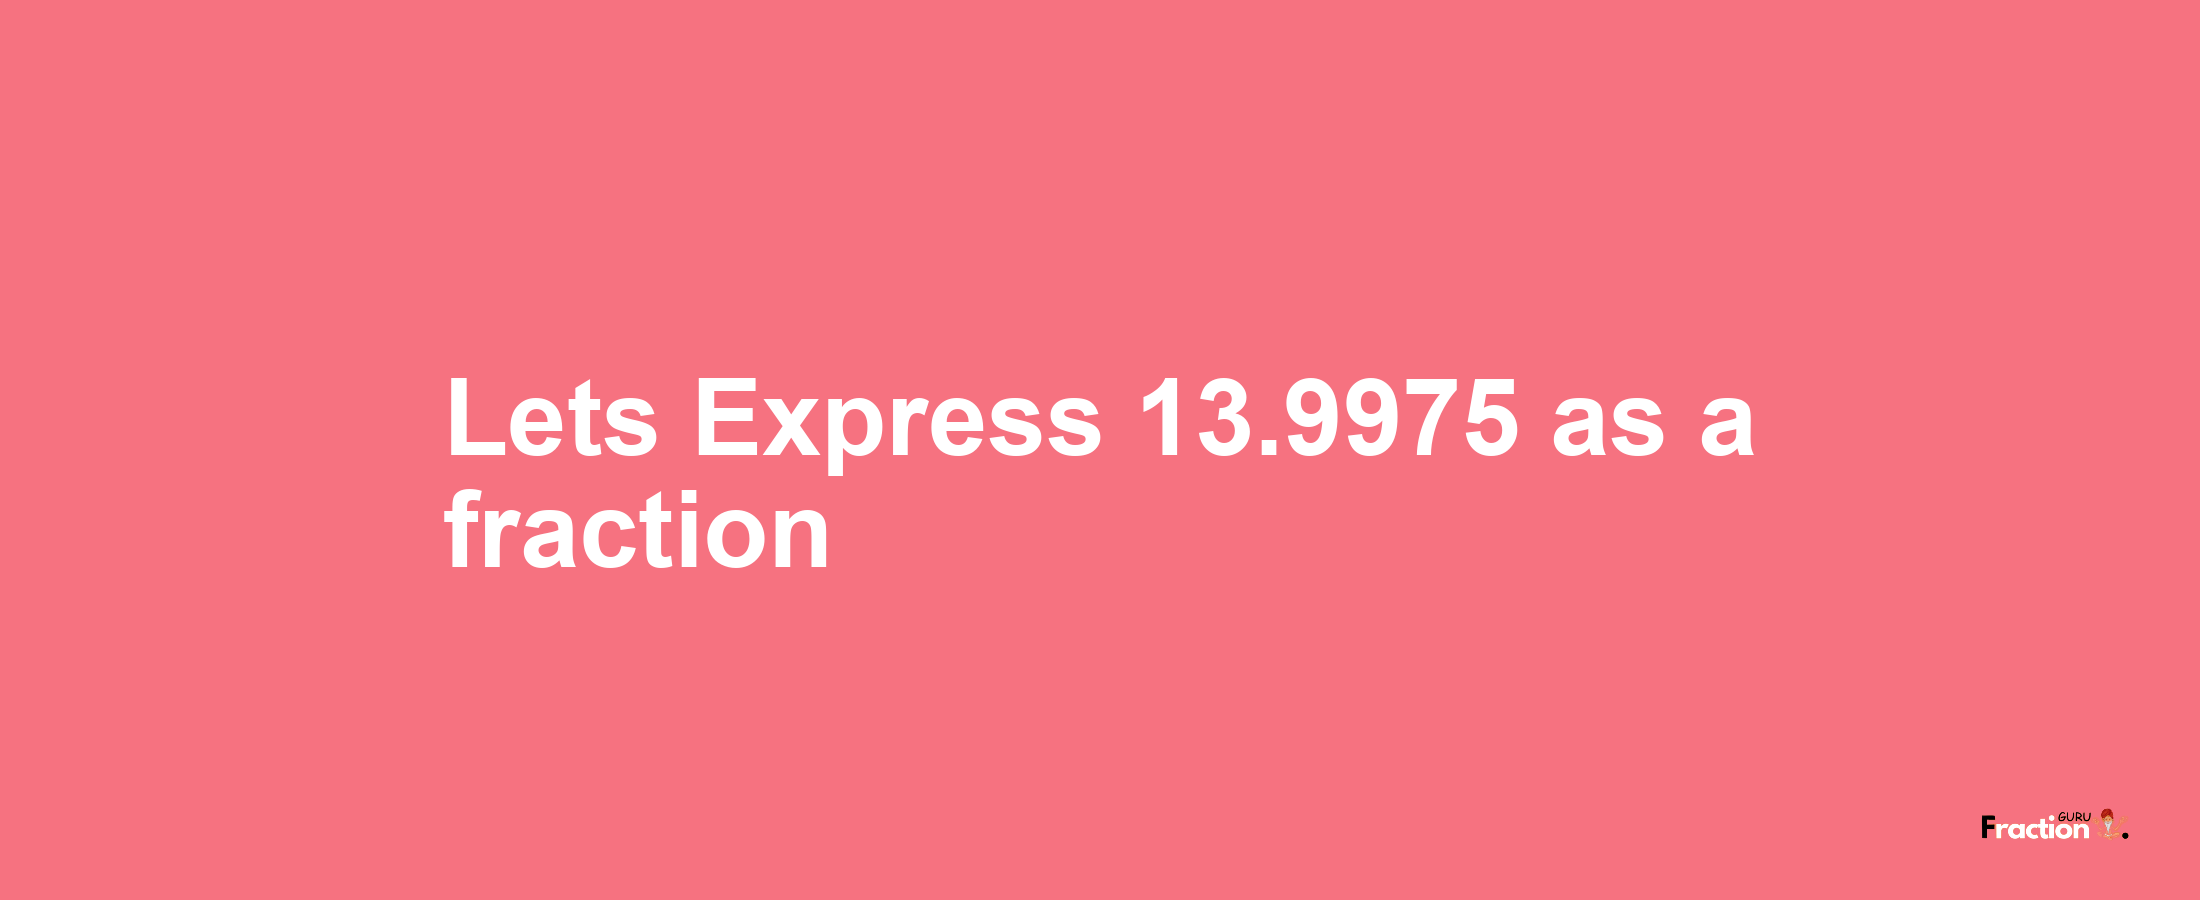 Lets Express 13.9975 as afraction